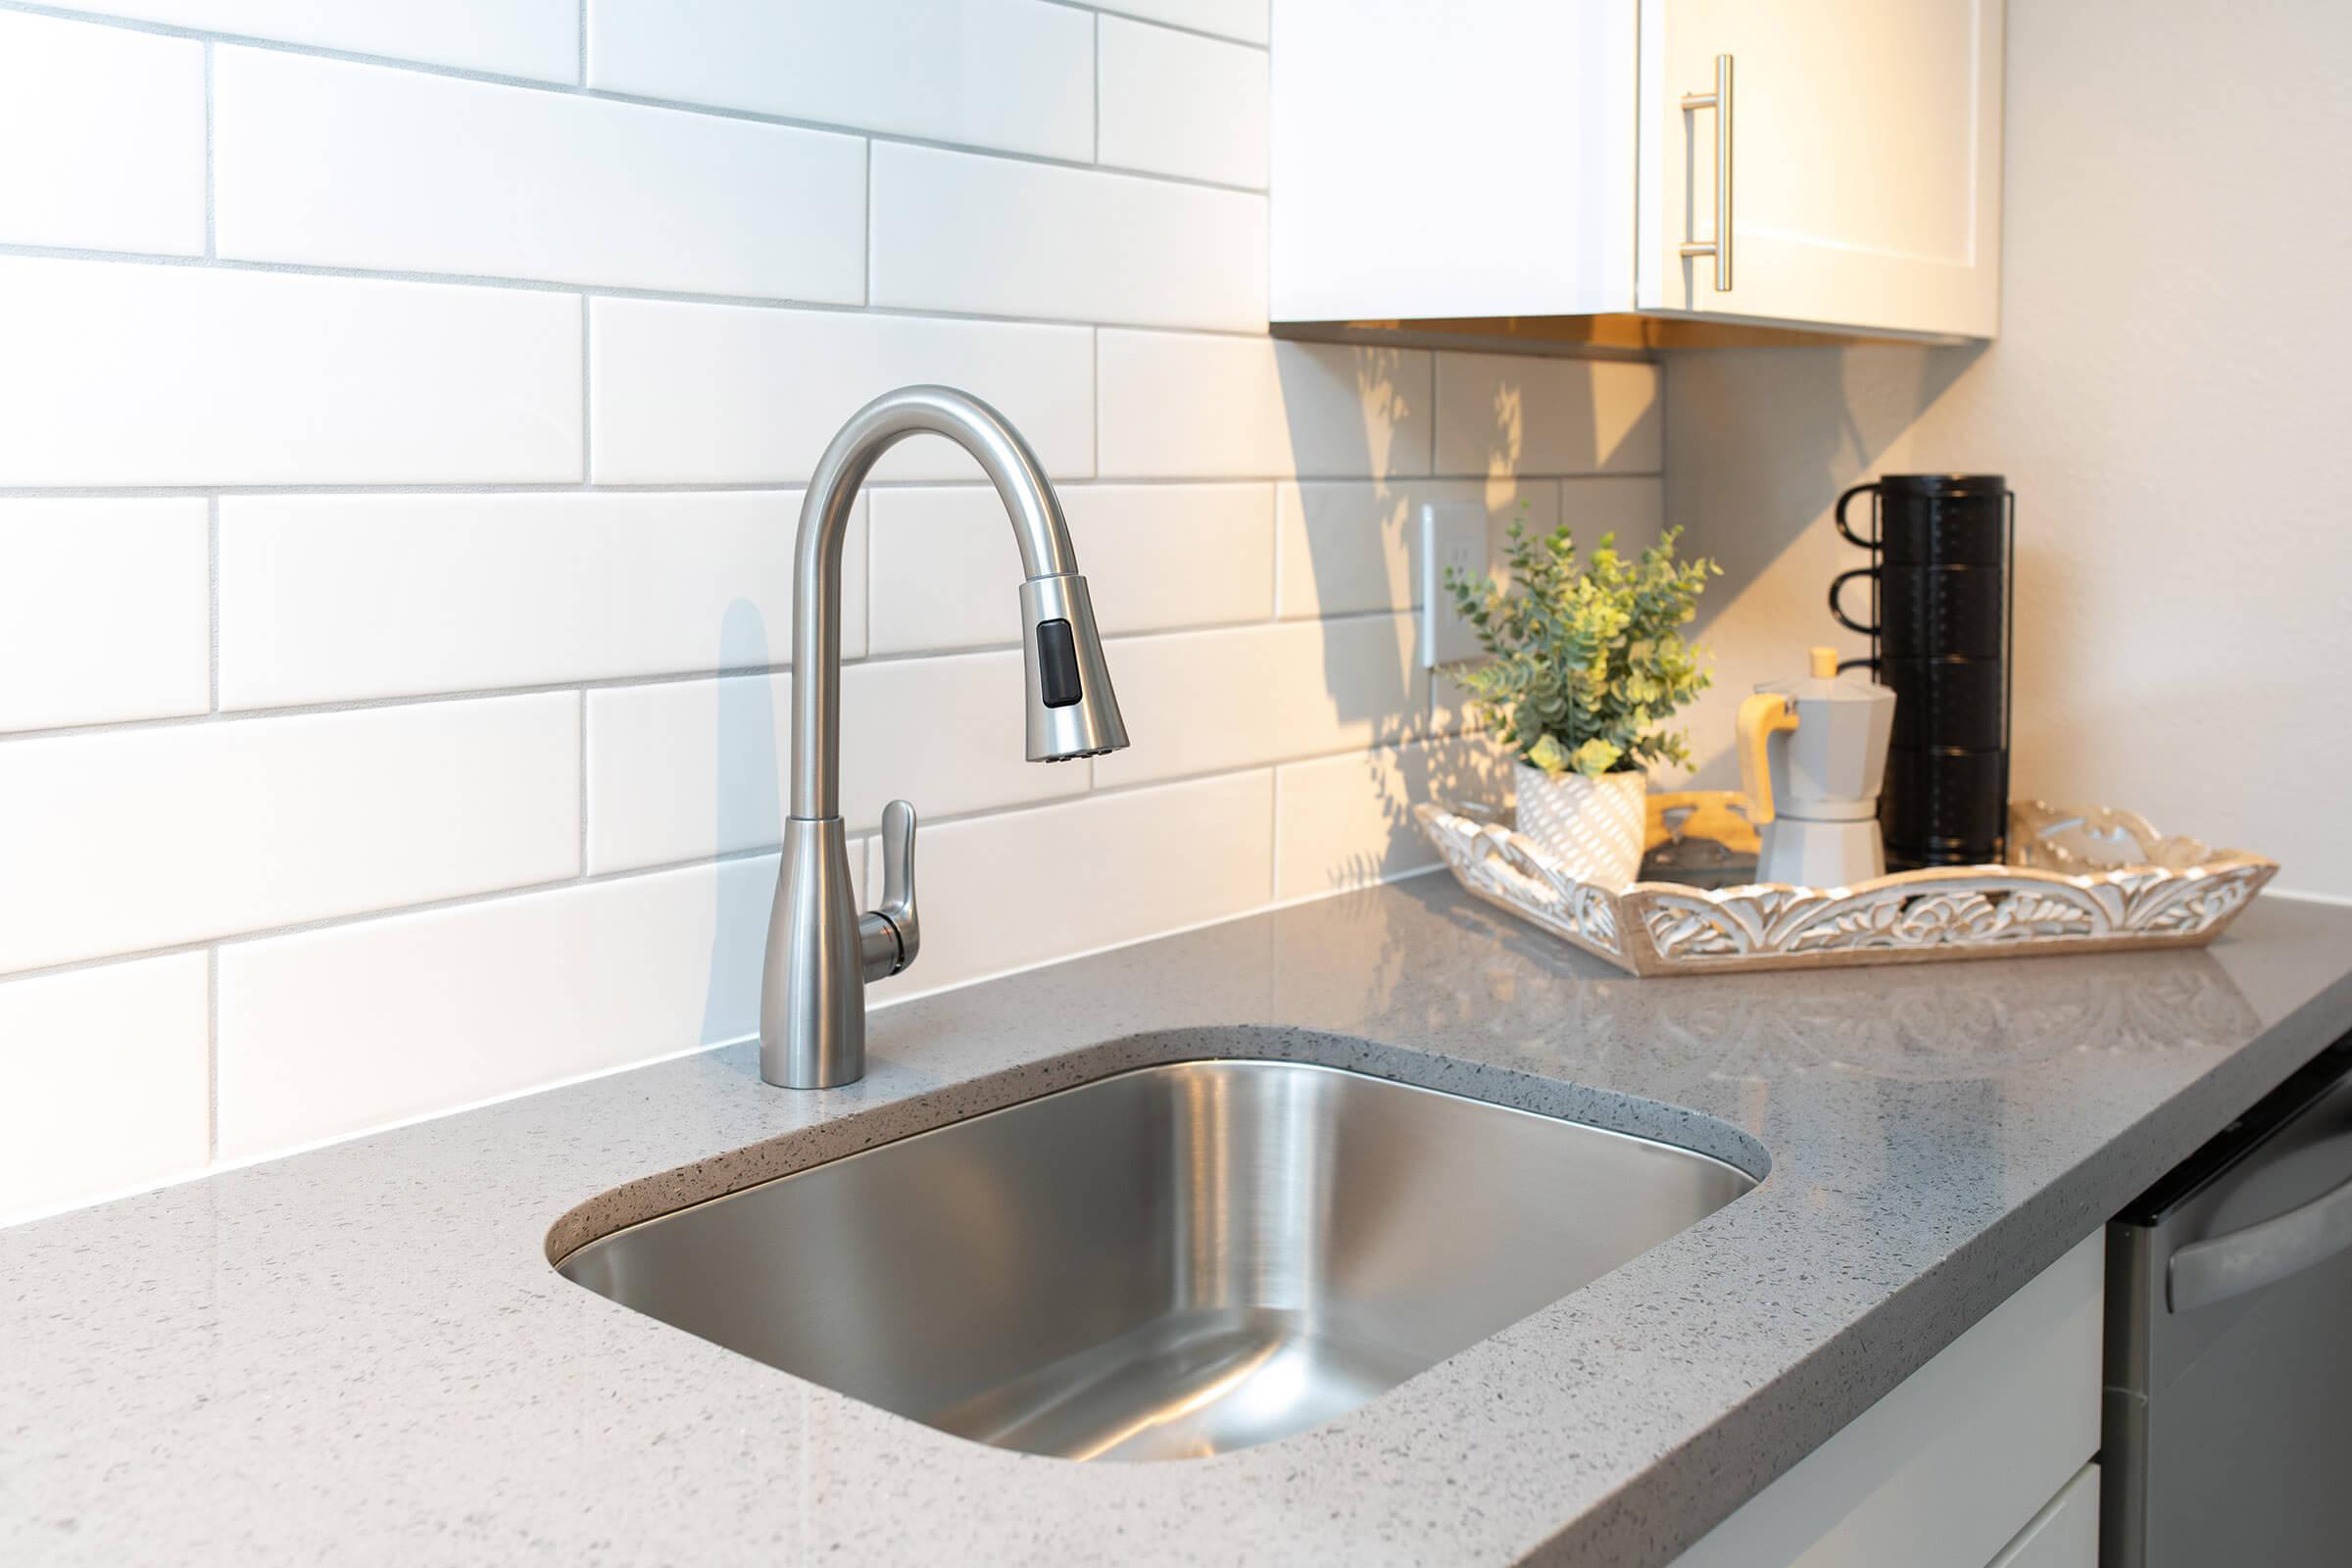 Modern stainless steel faucet and sink next to a tray of coffee supplies